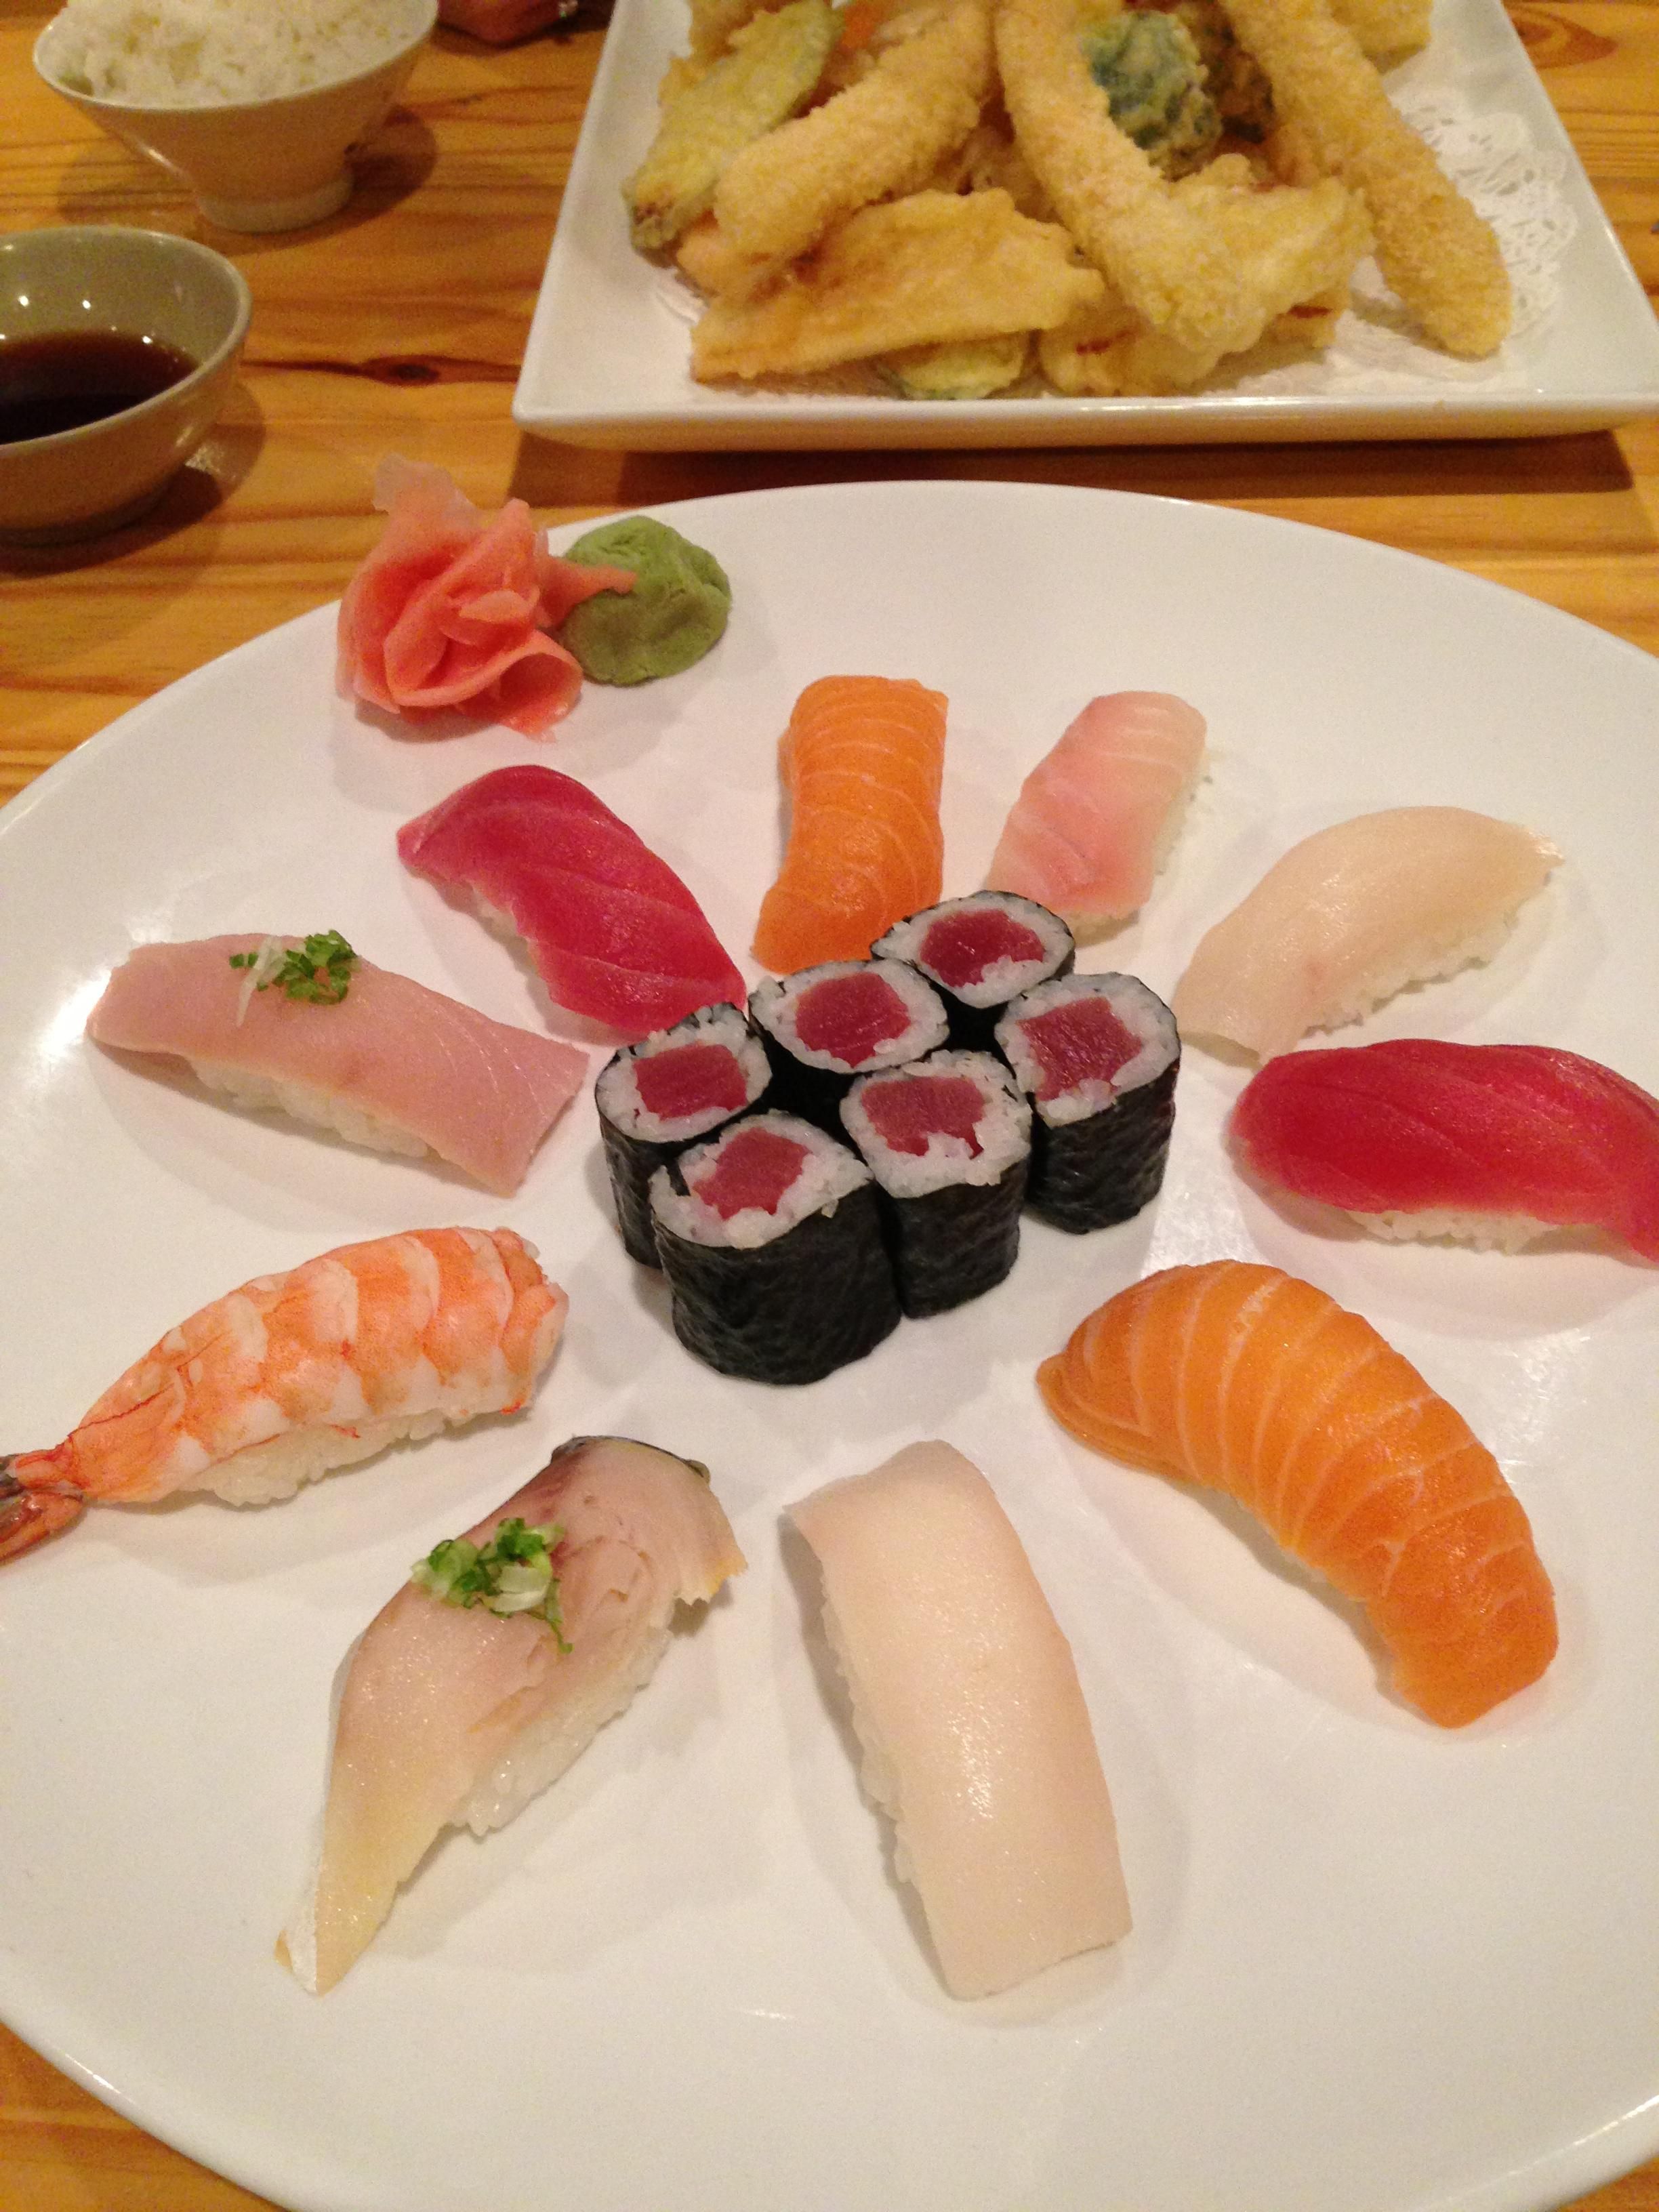 I ate] a plate of sushi | yummy | Pinterest | Foods and Food and drink